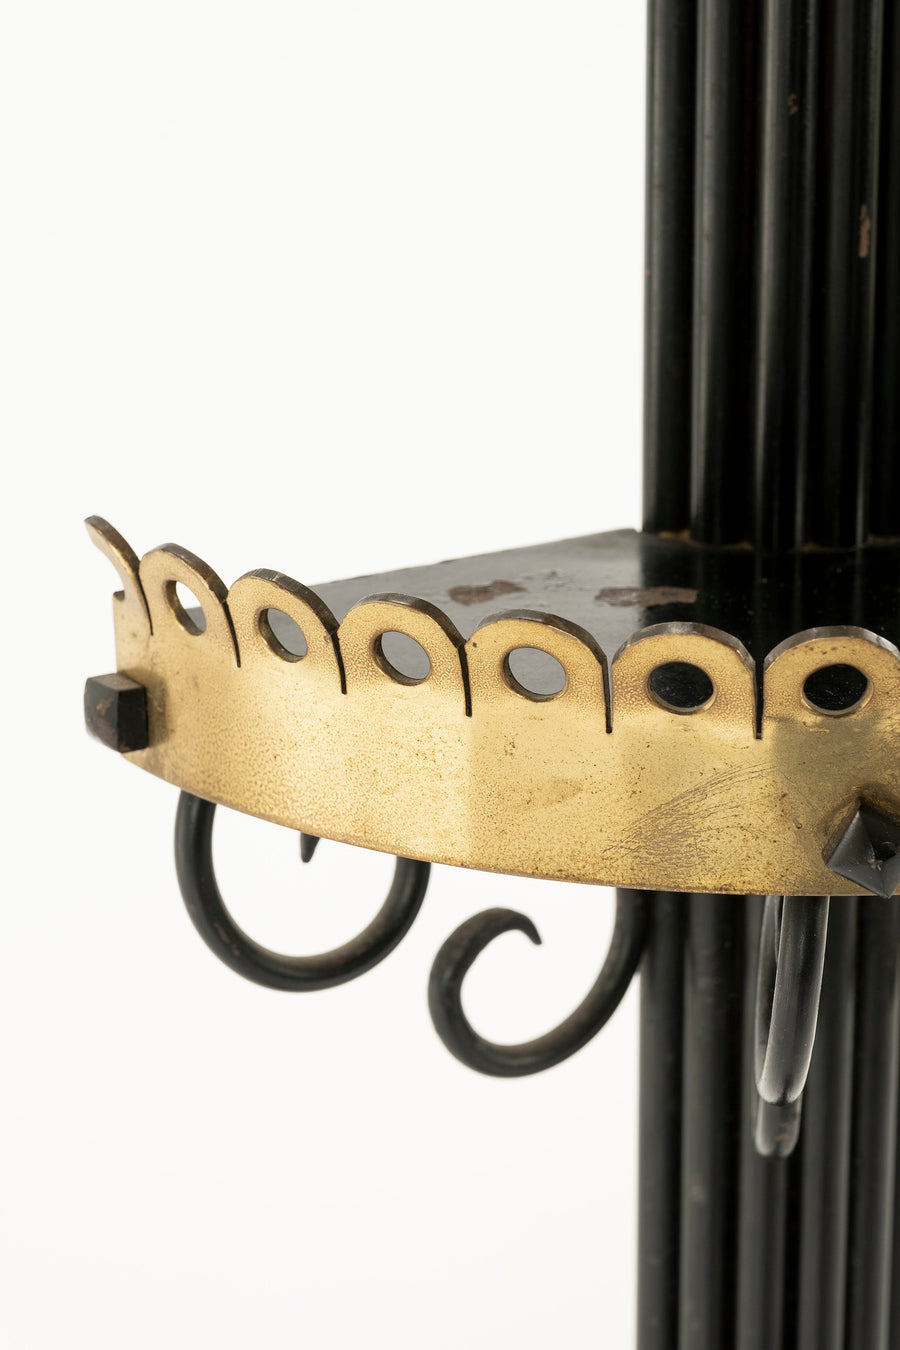 Jean Royère Style Branched Bouquet Iron and Brass Wall Sconces